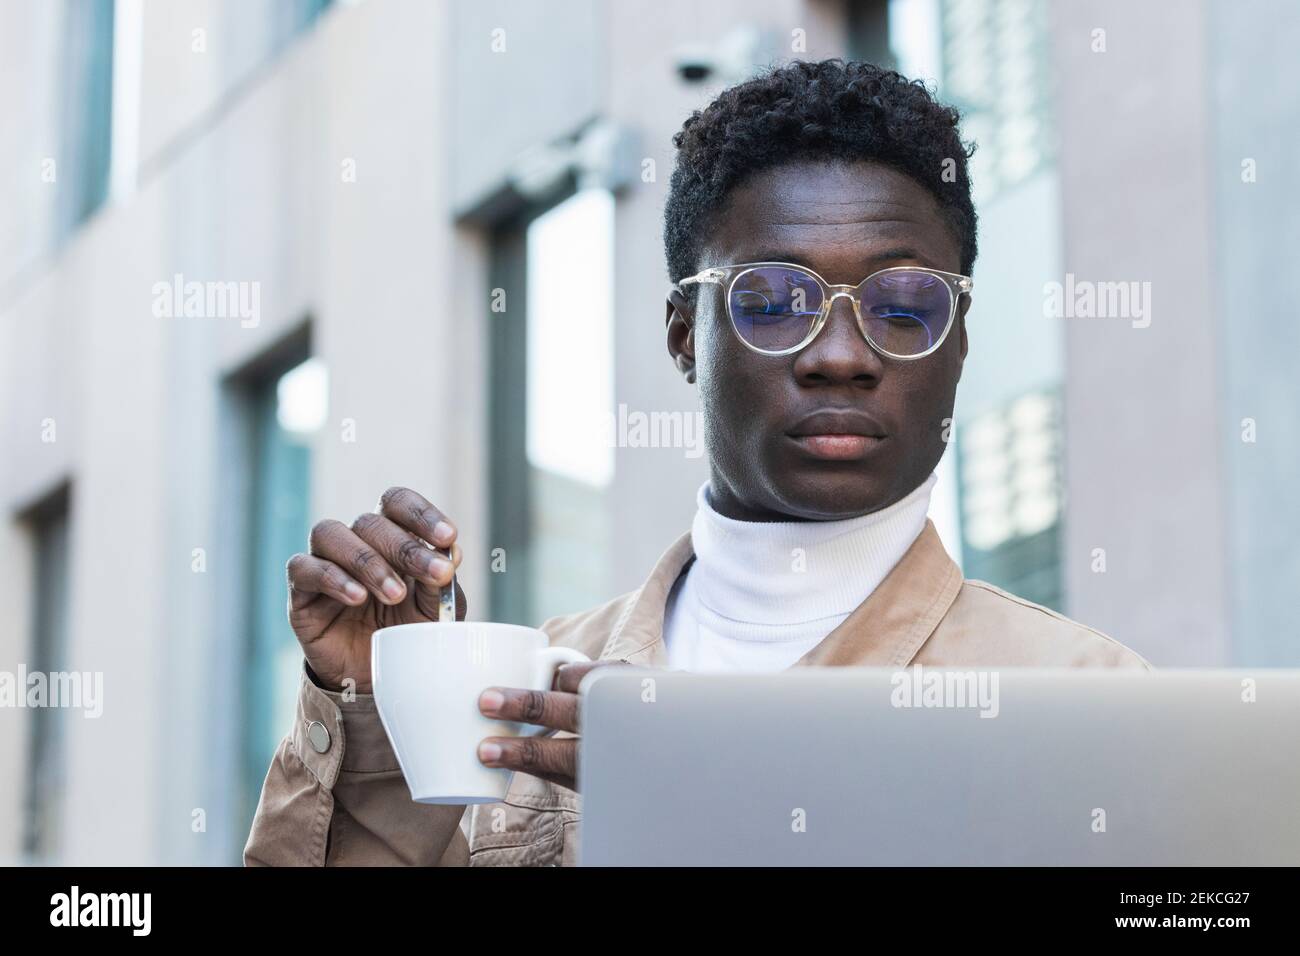 Young man stirring coffee while looking at laptop at sidewalk cafe Stock Photo